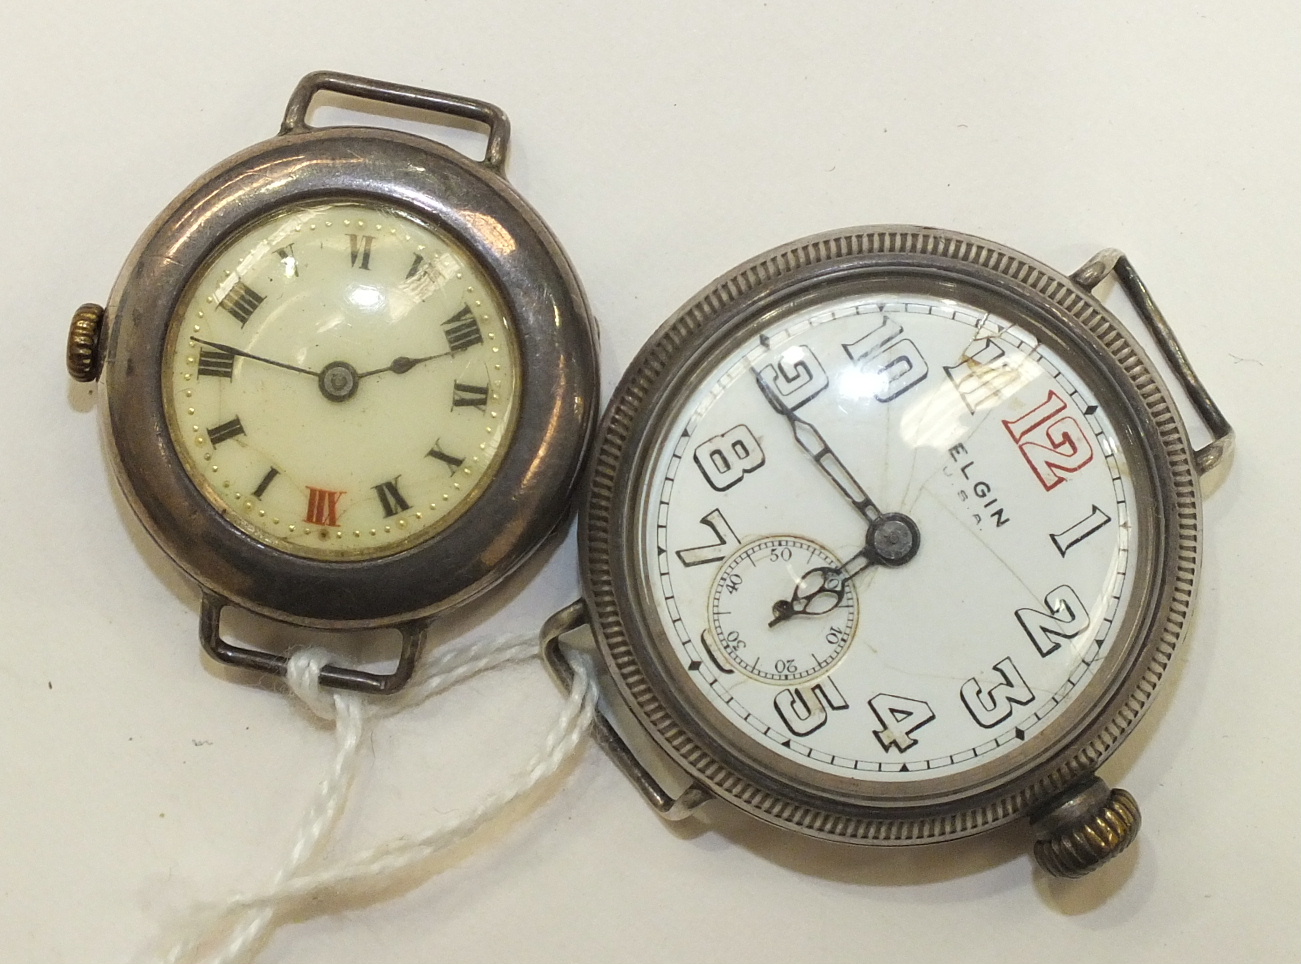 Elgin, a silver-cased trench-watch-style wrist watch with Arabic numerals and seconds subsidiary and - Image 2 of 2